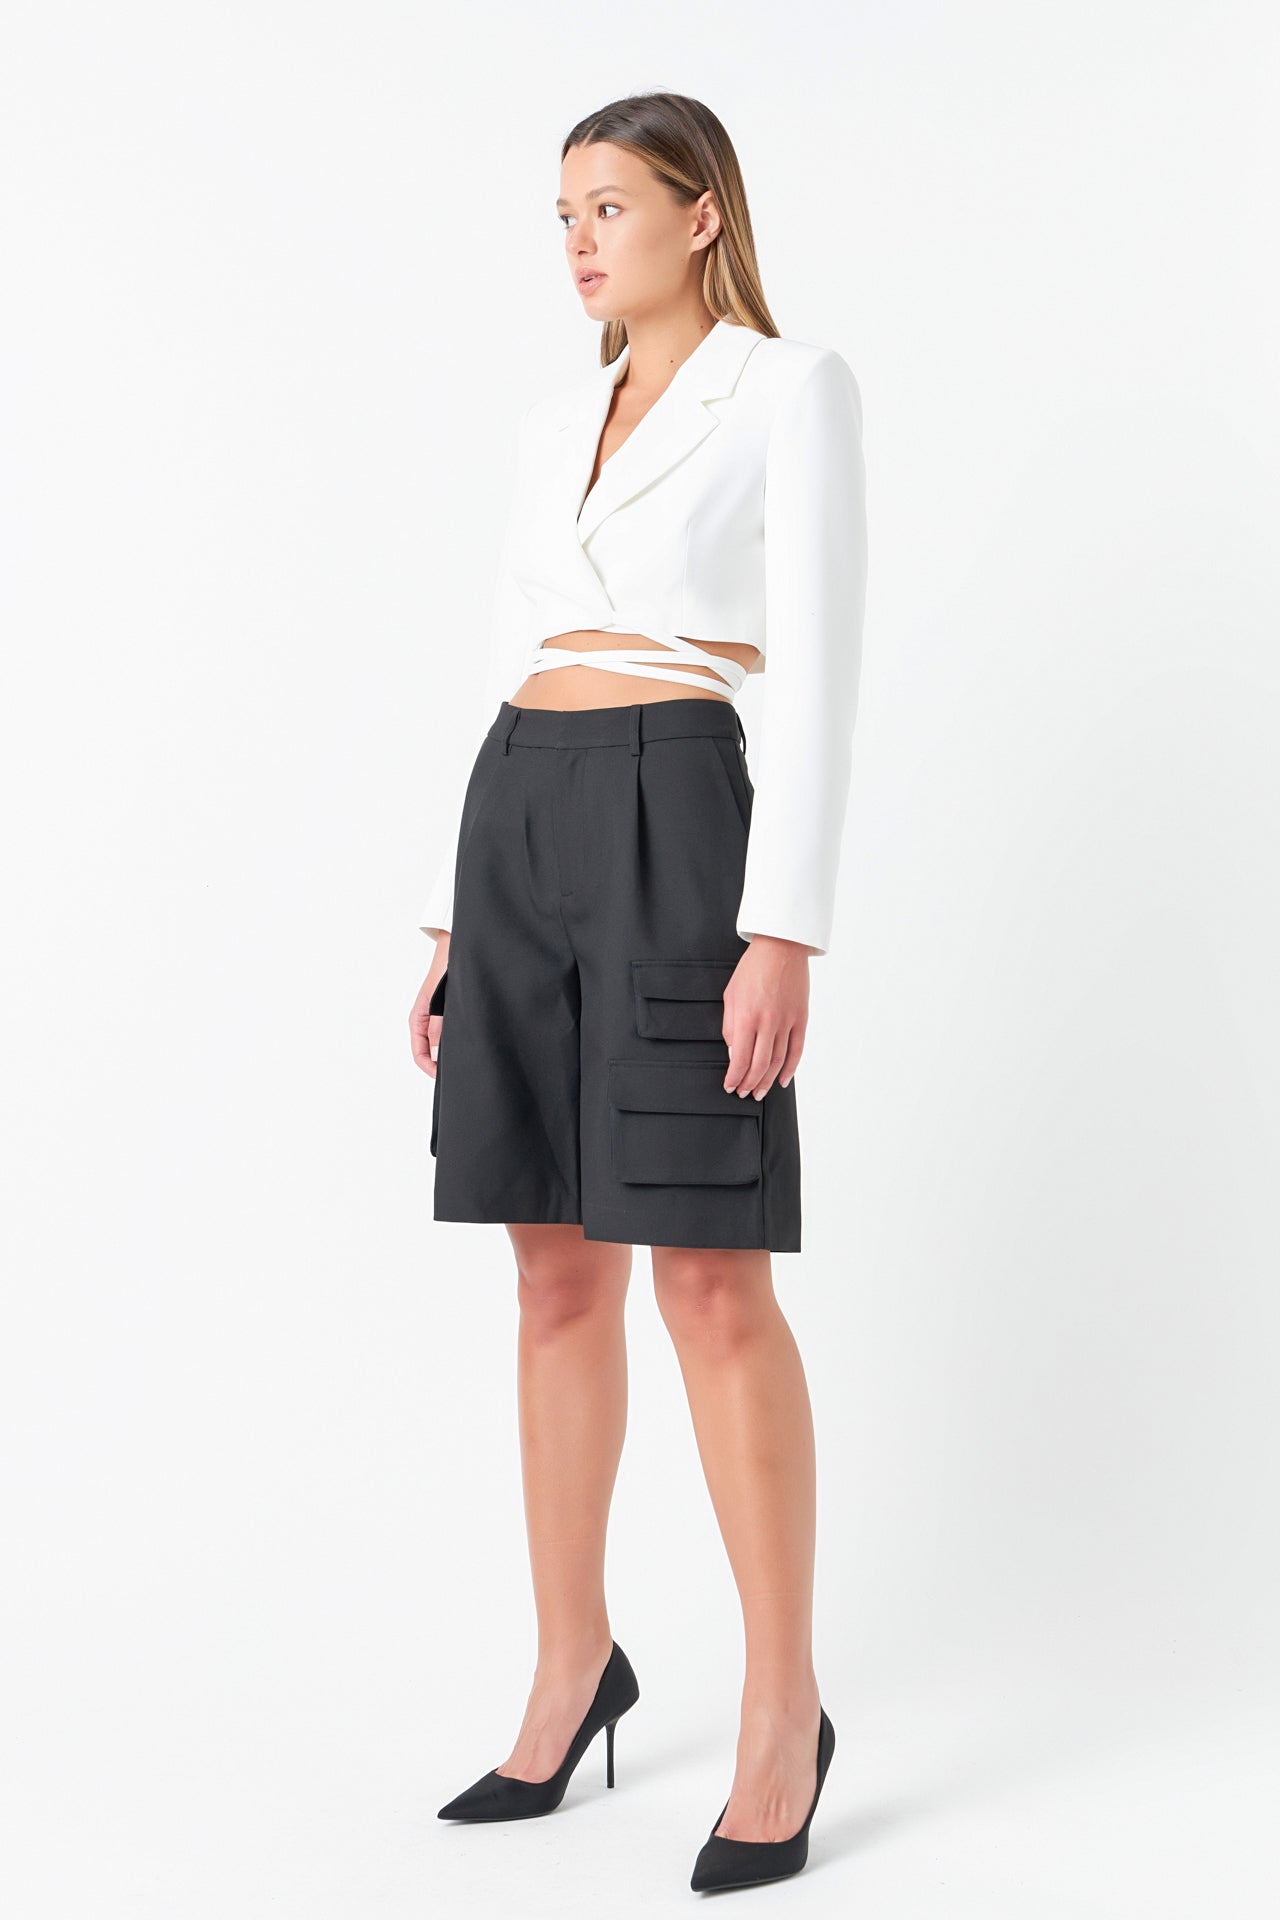 GREY LAB - Cropped Blazer with Tie Detail - BLAZERS available at Objectrare